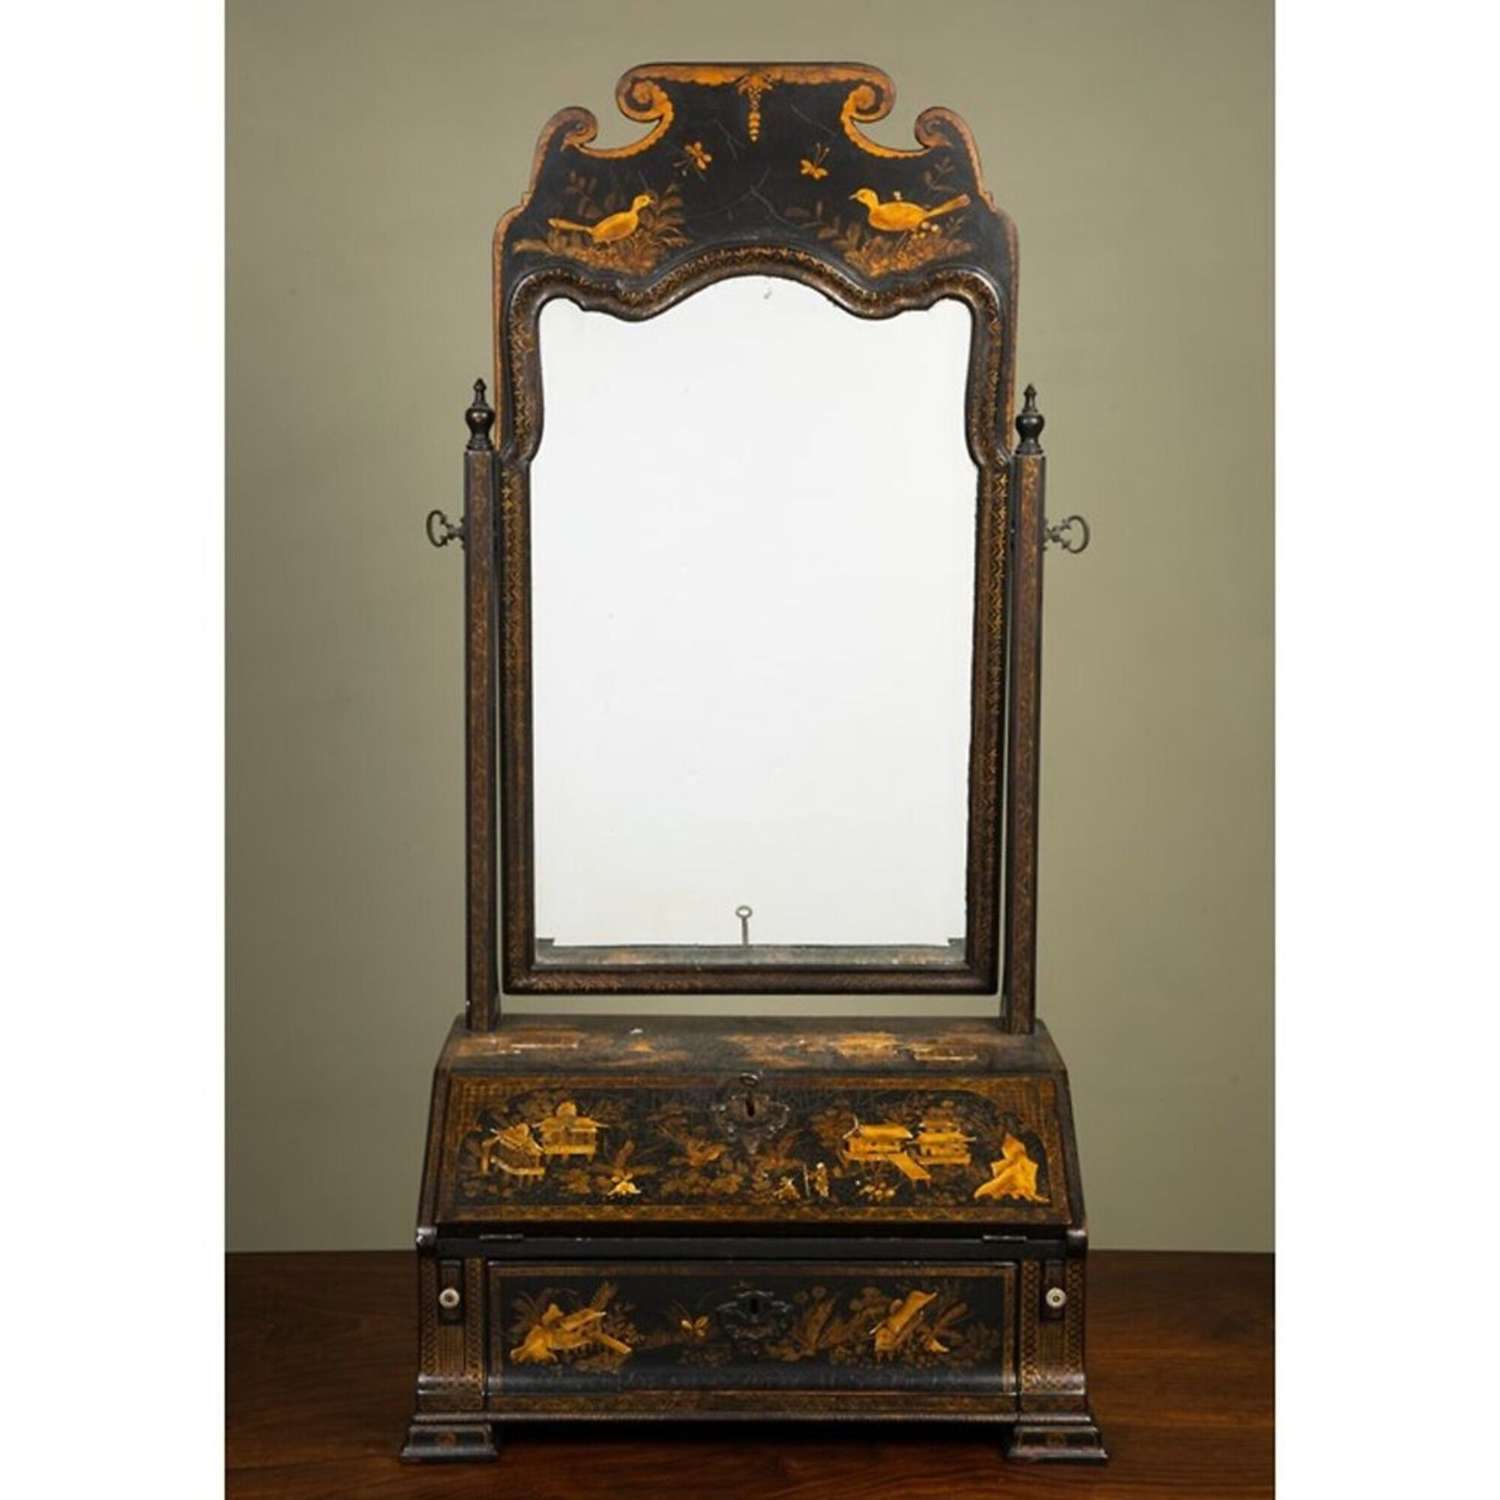 A George II chinoiserie black lacquered dressing table mirror